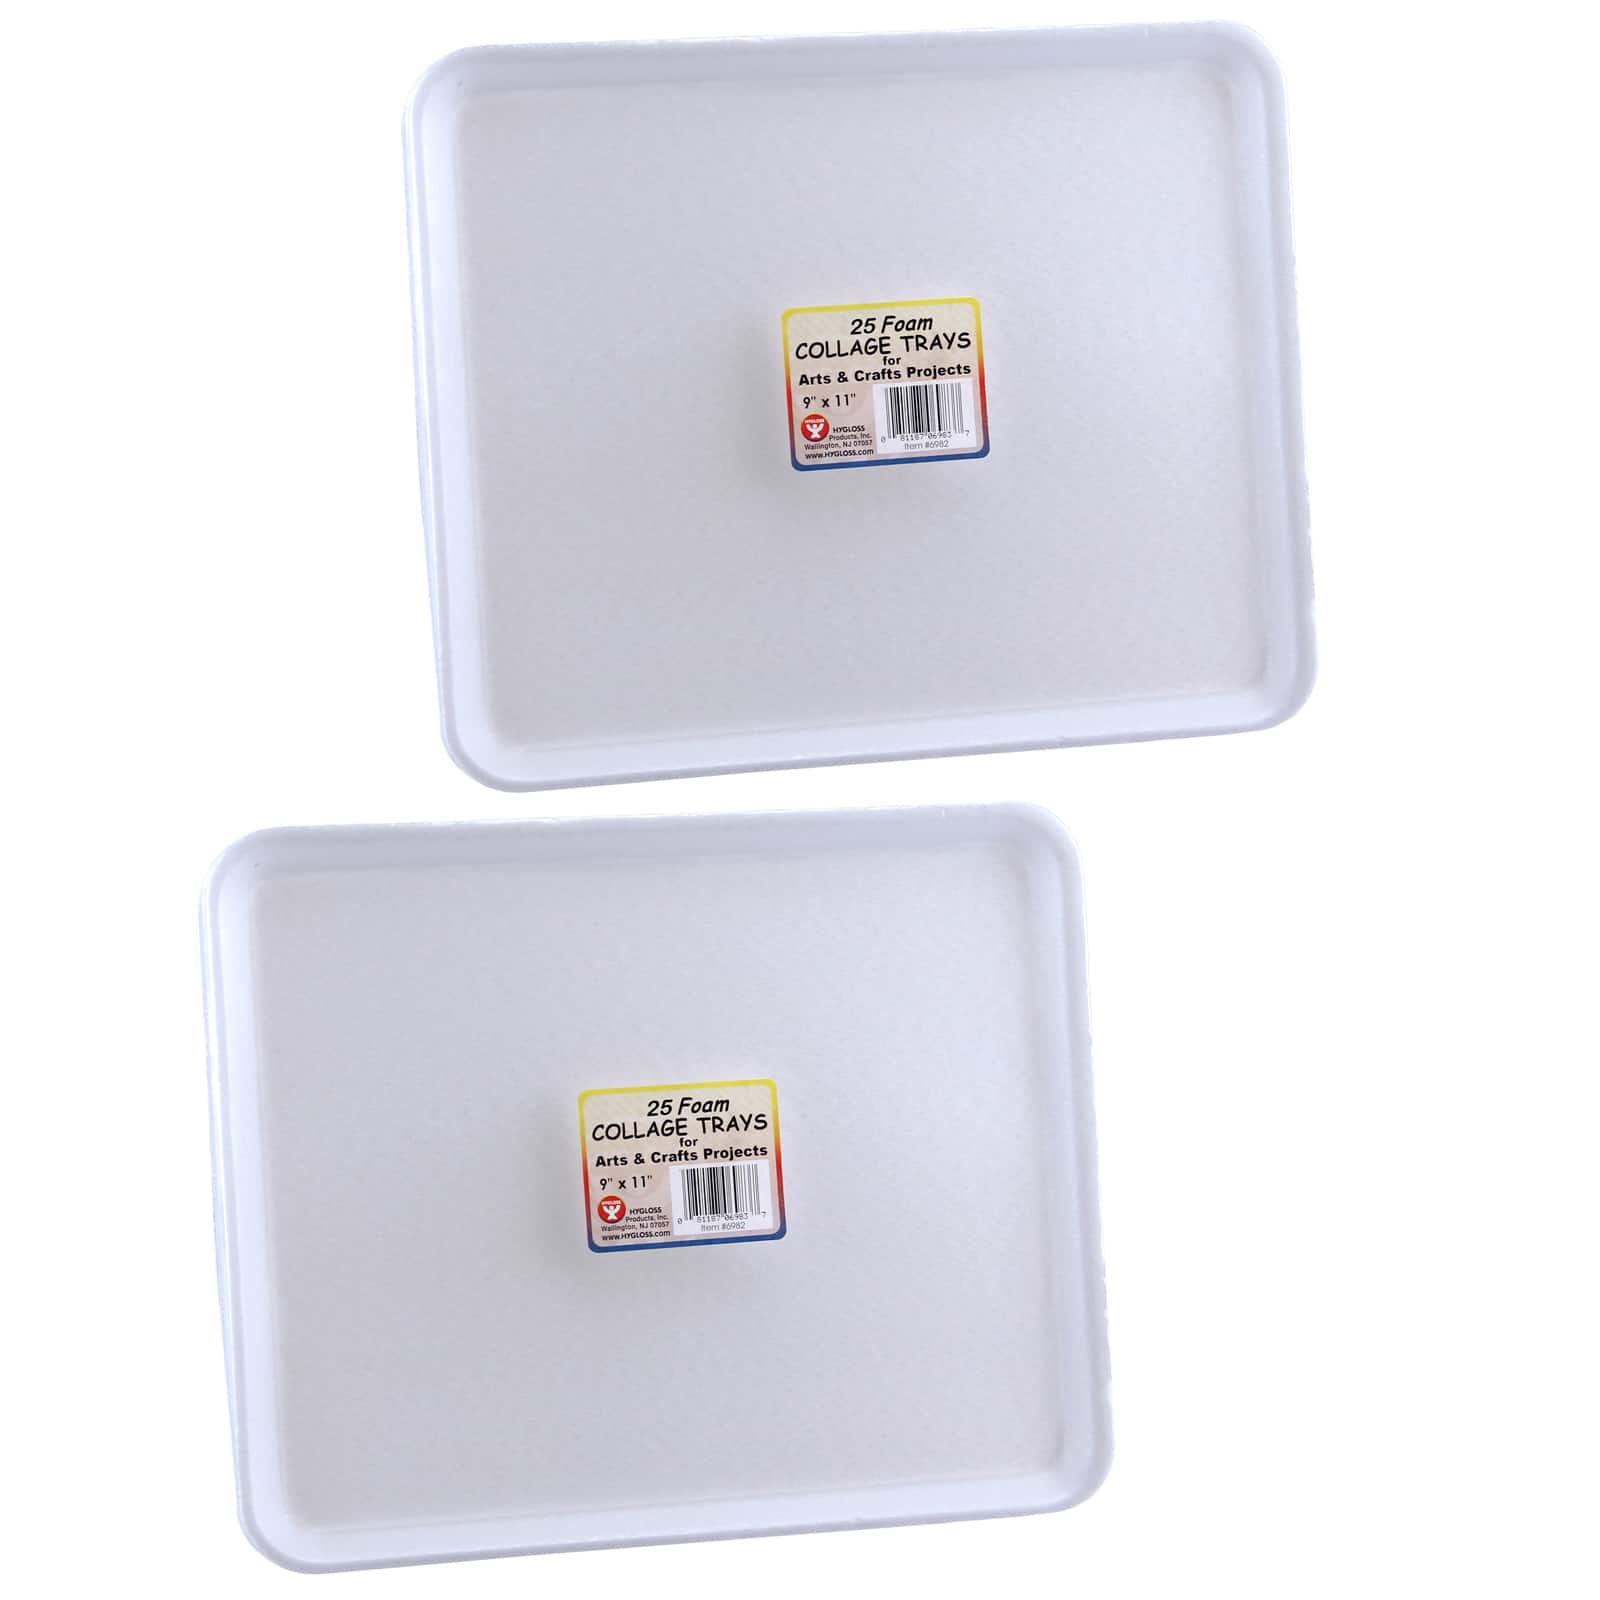 50 Pcs Collages and Crafts Foam Trays, White Foam Meat Tray Food Tray Paint and Ink Mixing